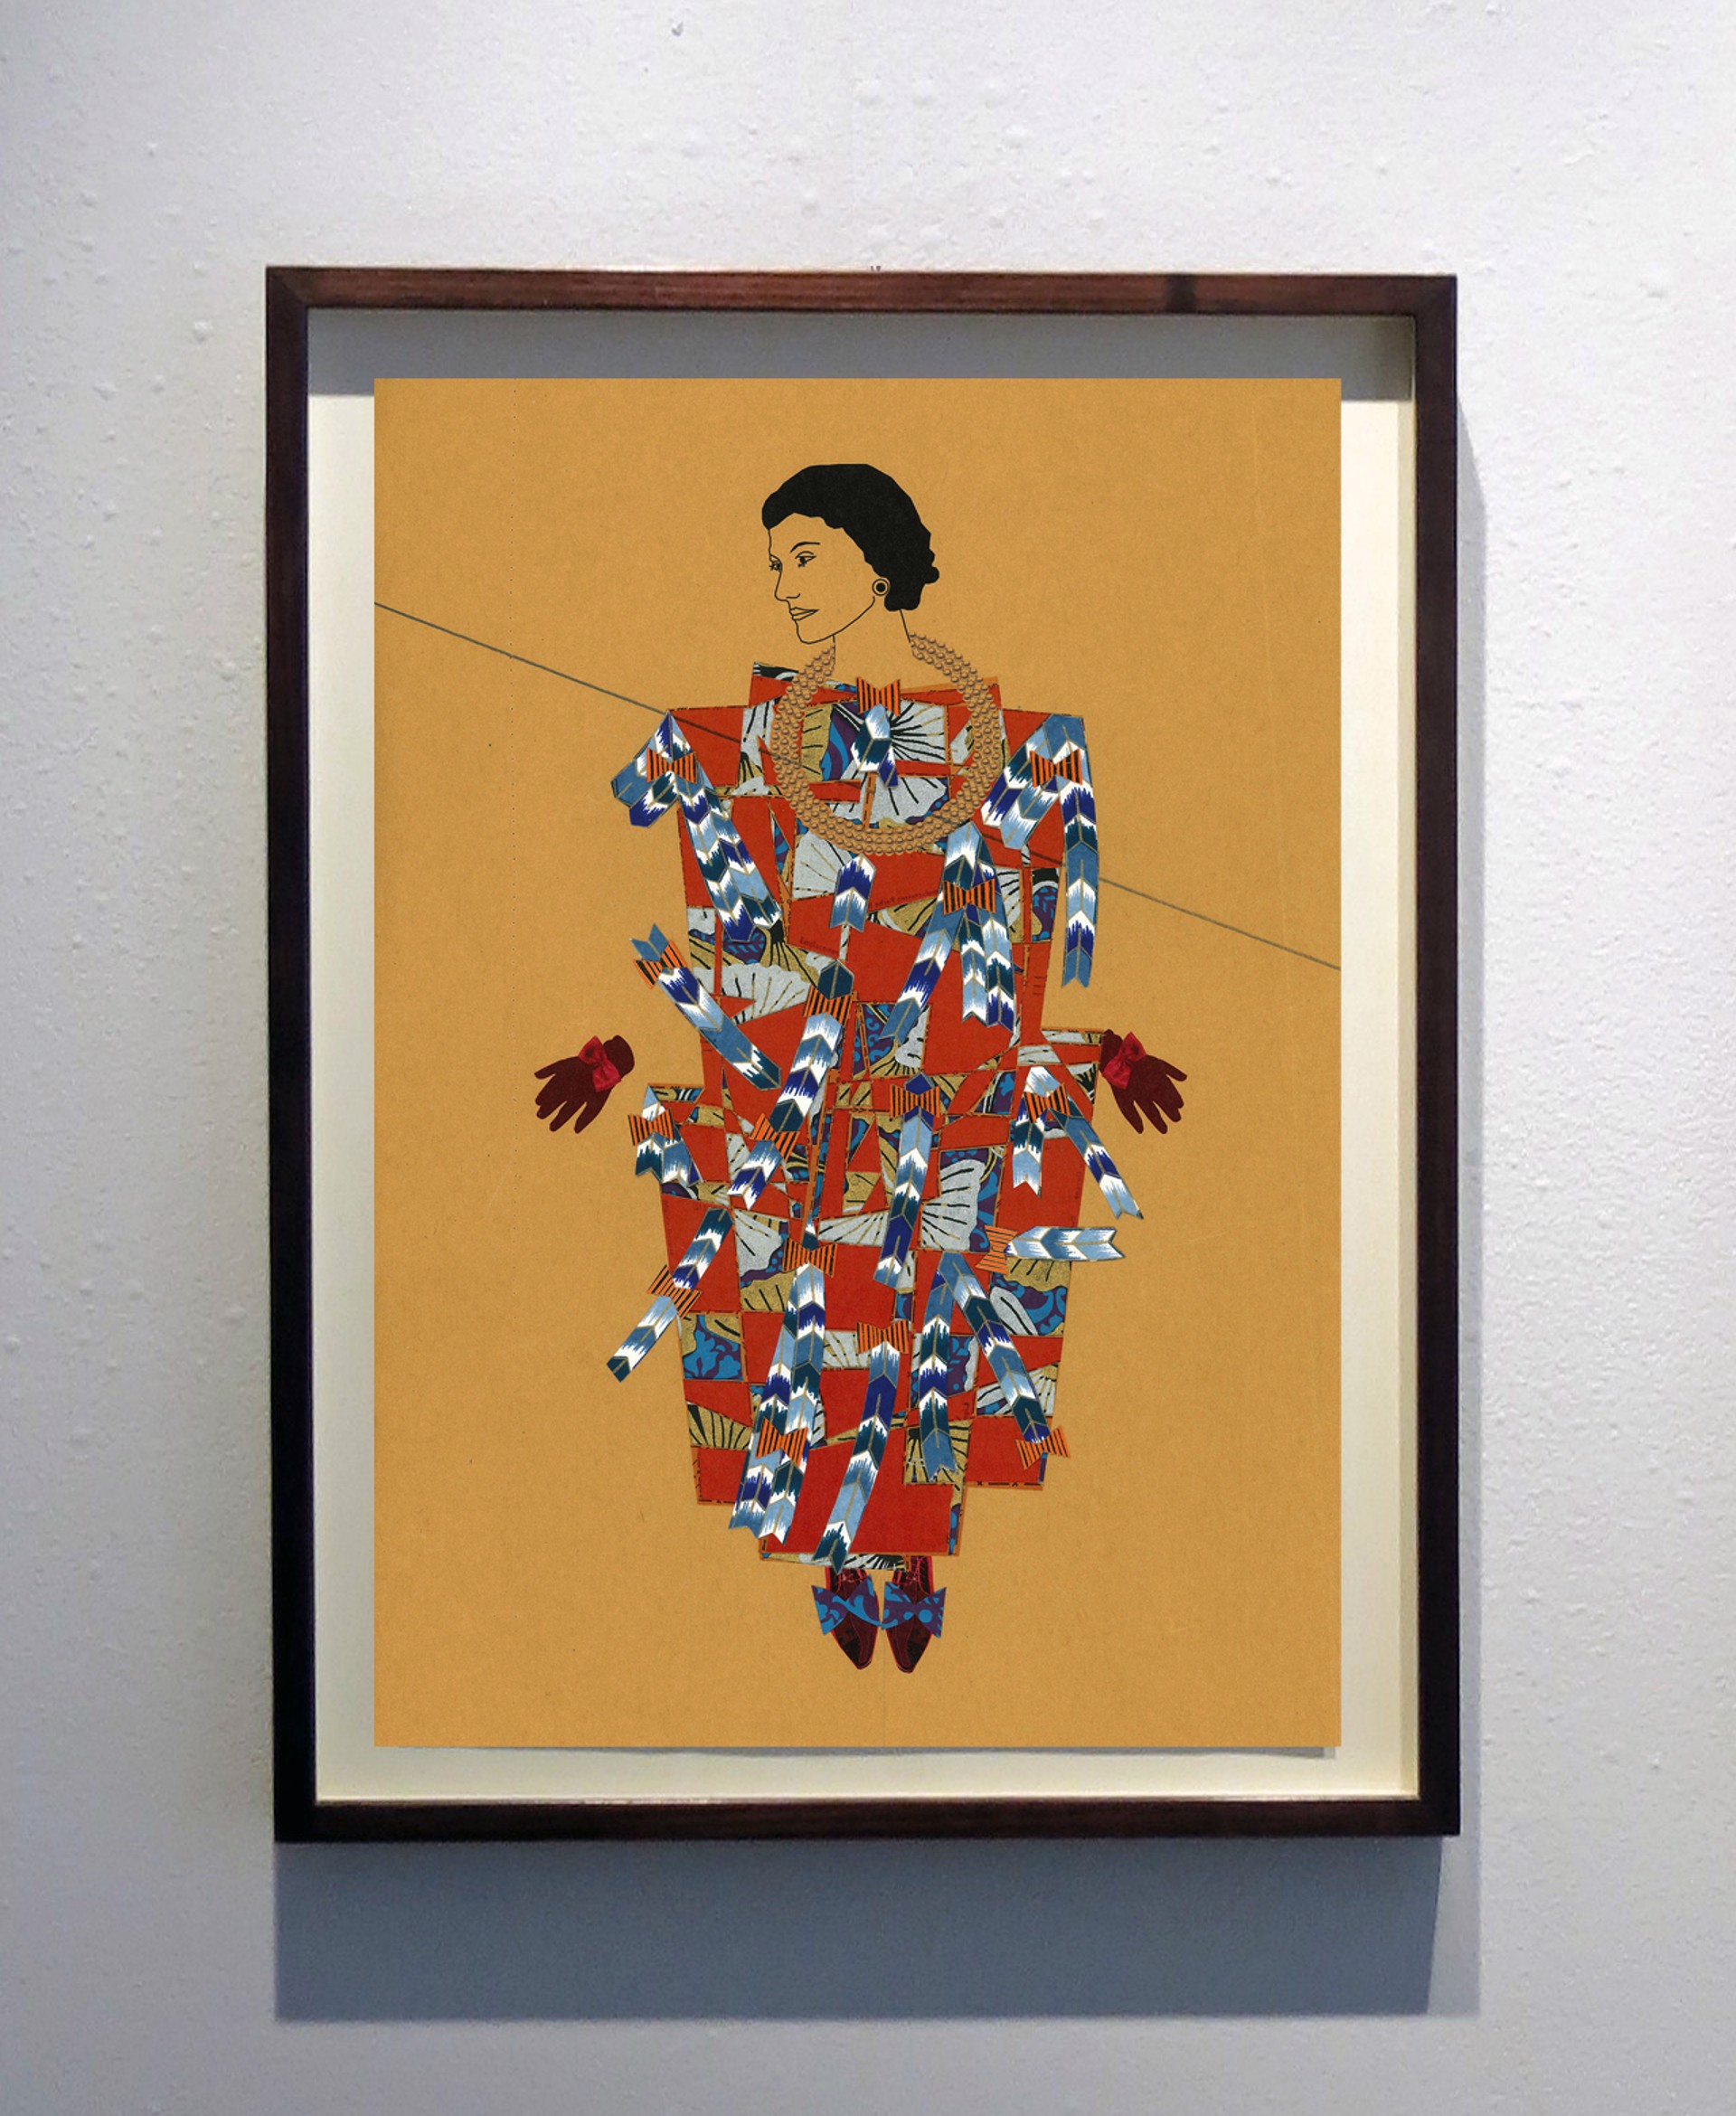 A Study on Coco n°4 by Hormazd Narielwalla